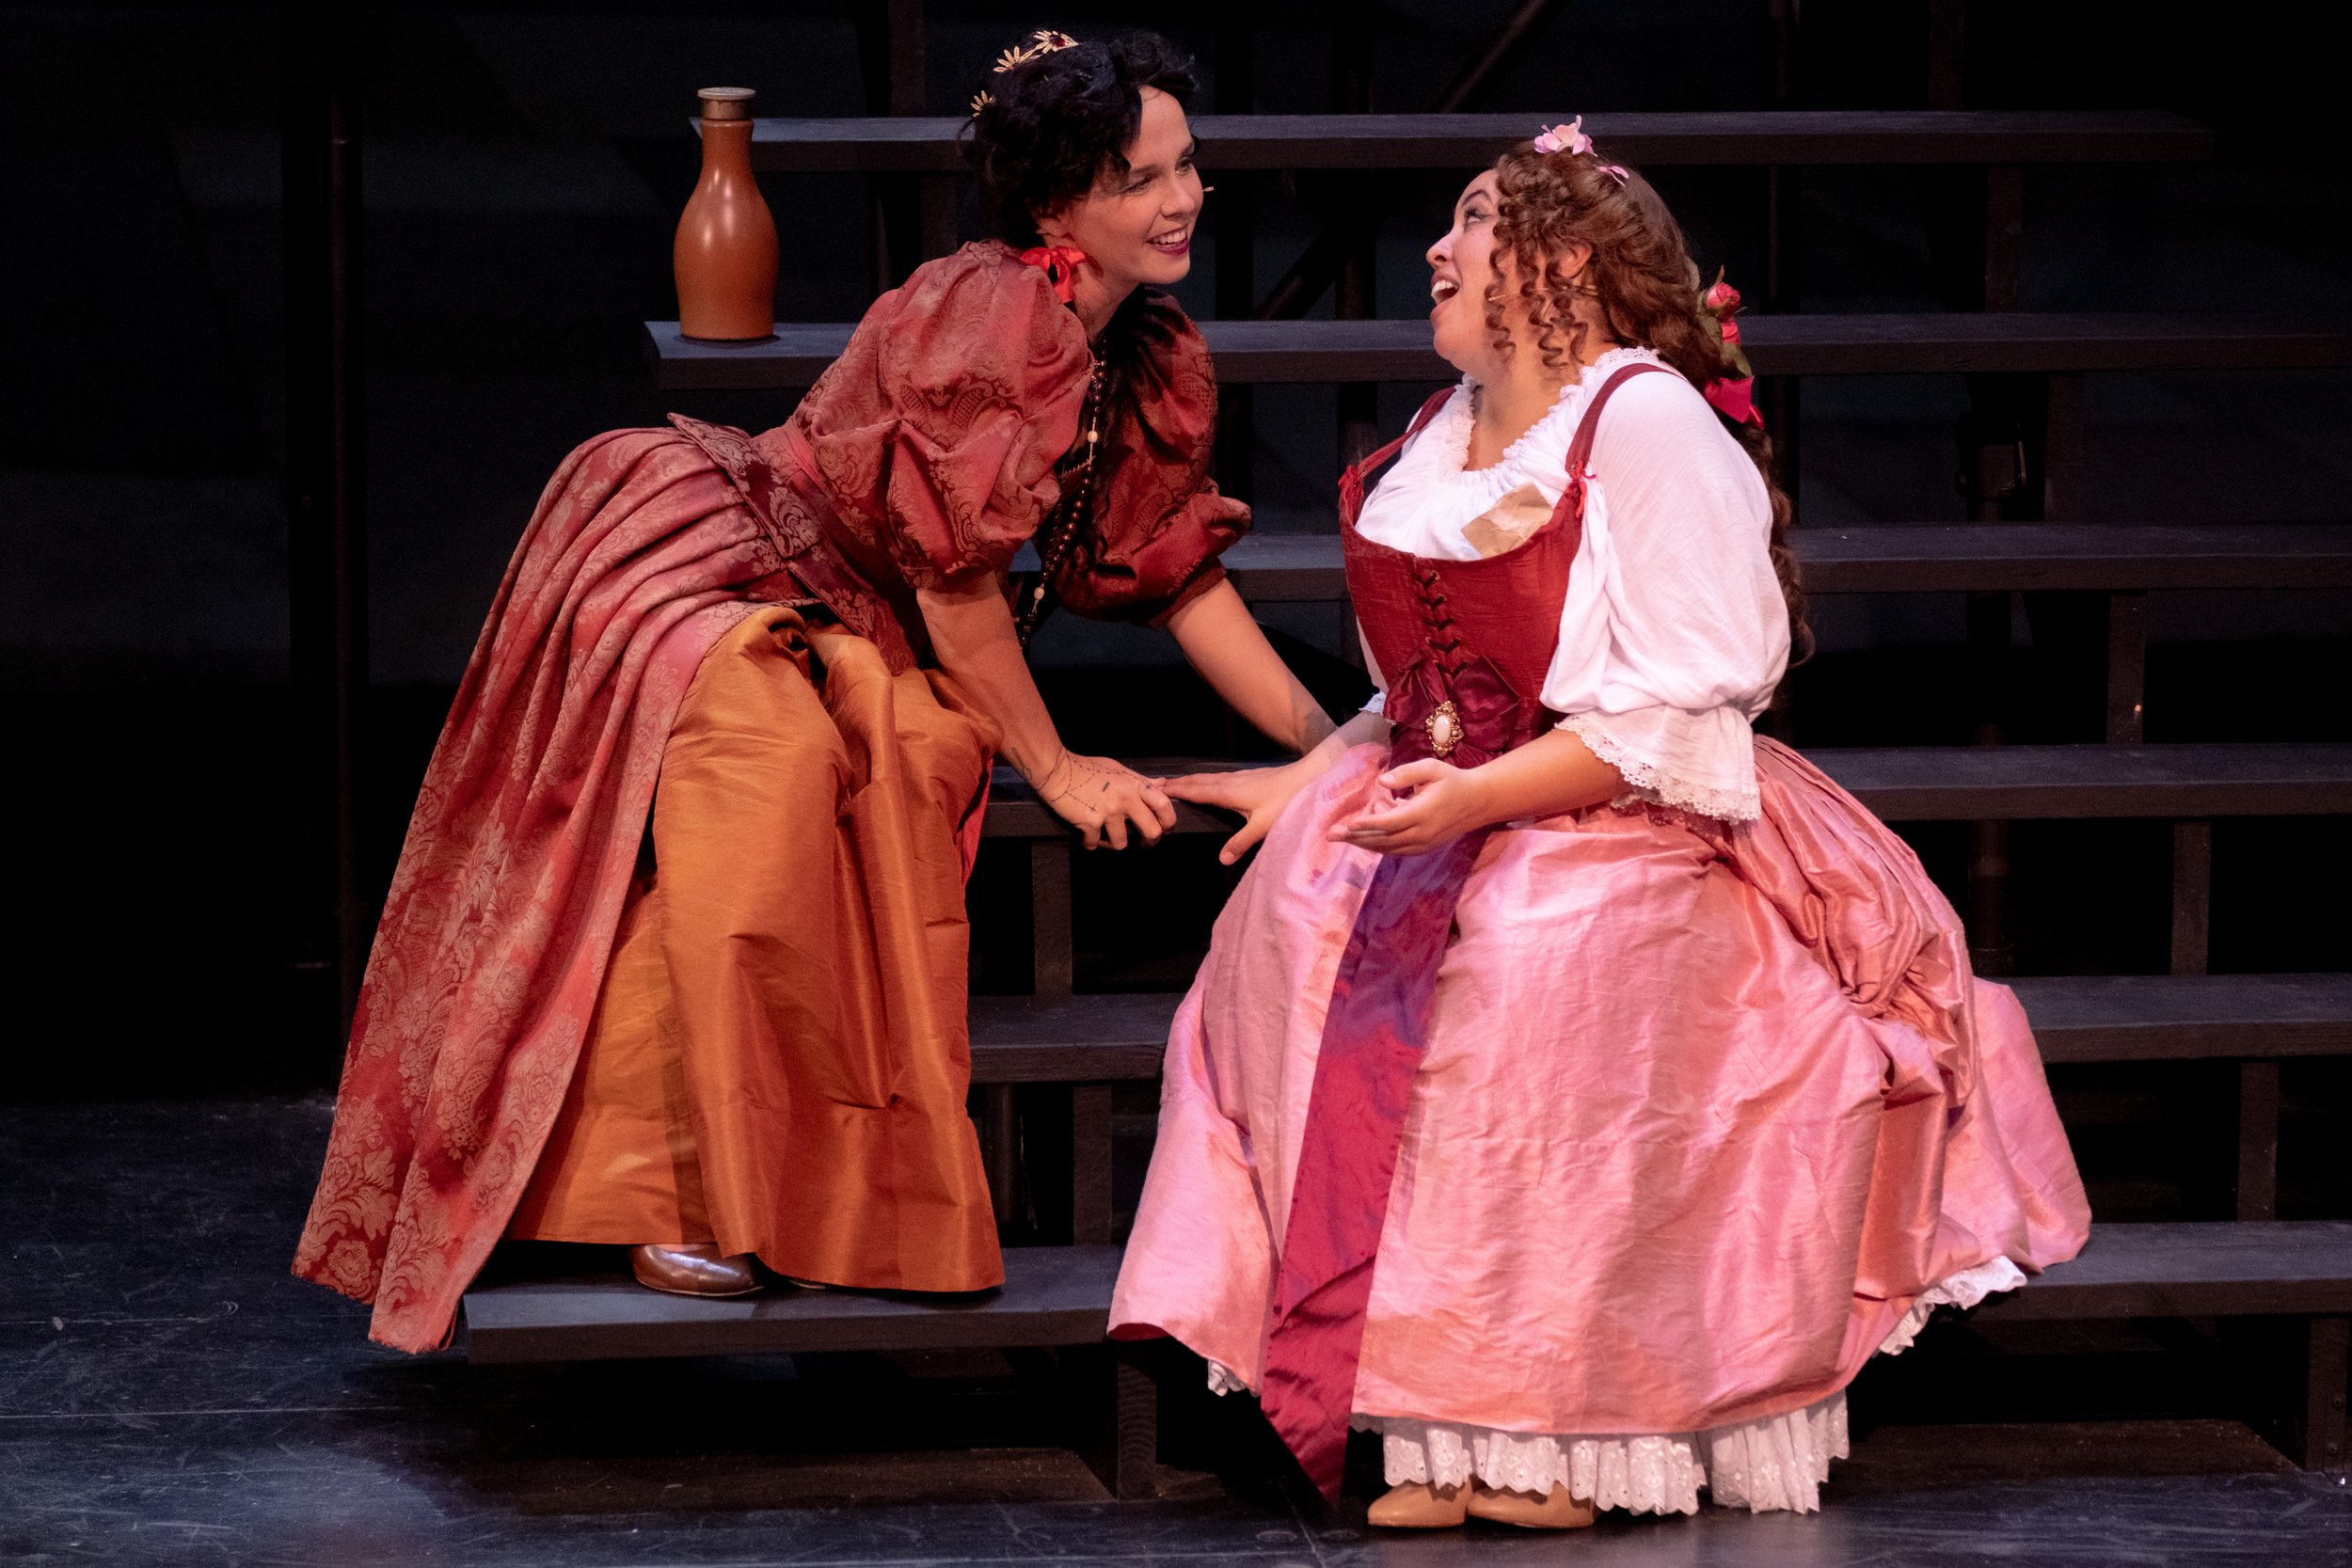  Megan Winberg, playing the role of Milady de Winter, as she attempts to get information from Jazzy Skjold-Terrell, playing Constance Bonacieux on stage at the Santa Monica College Theater Department Main Stage on the Main Campus in Santa Monica, Cal